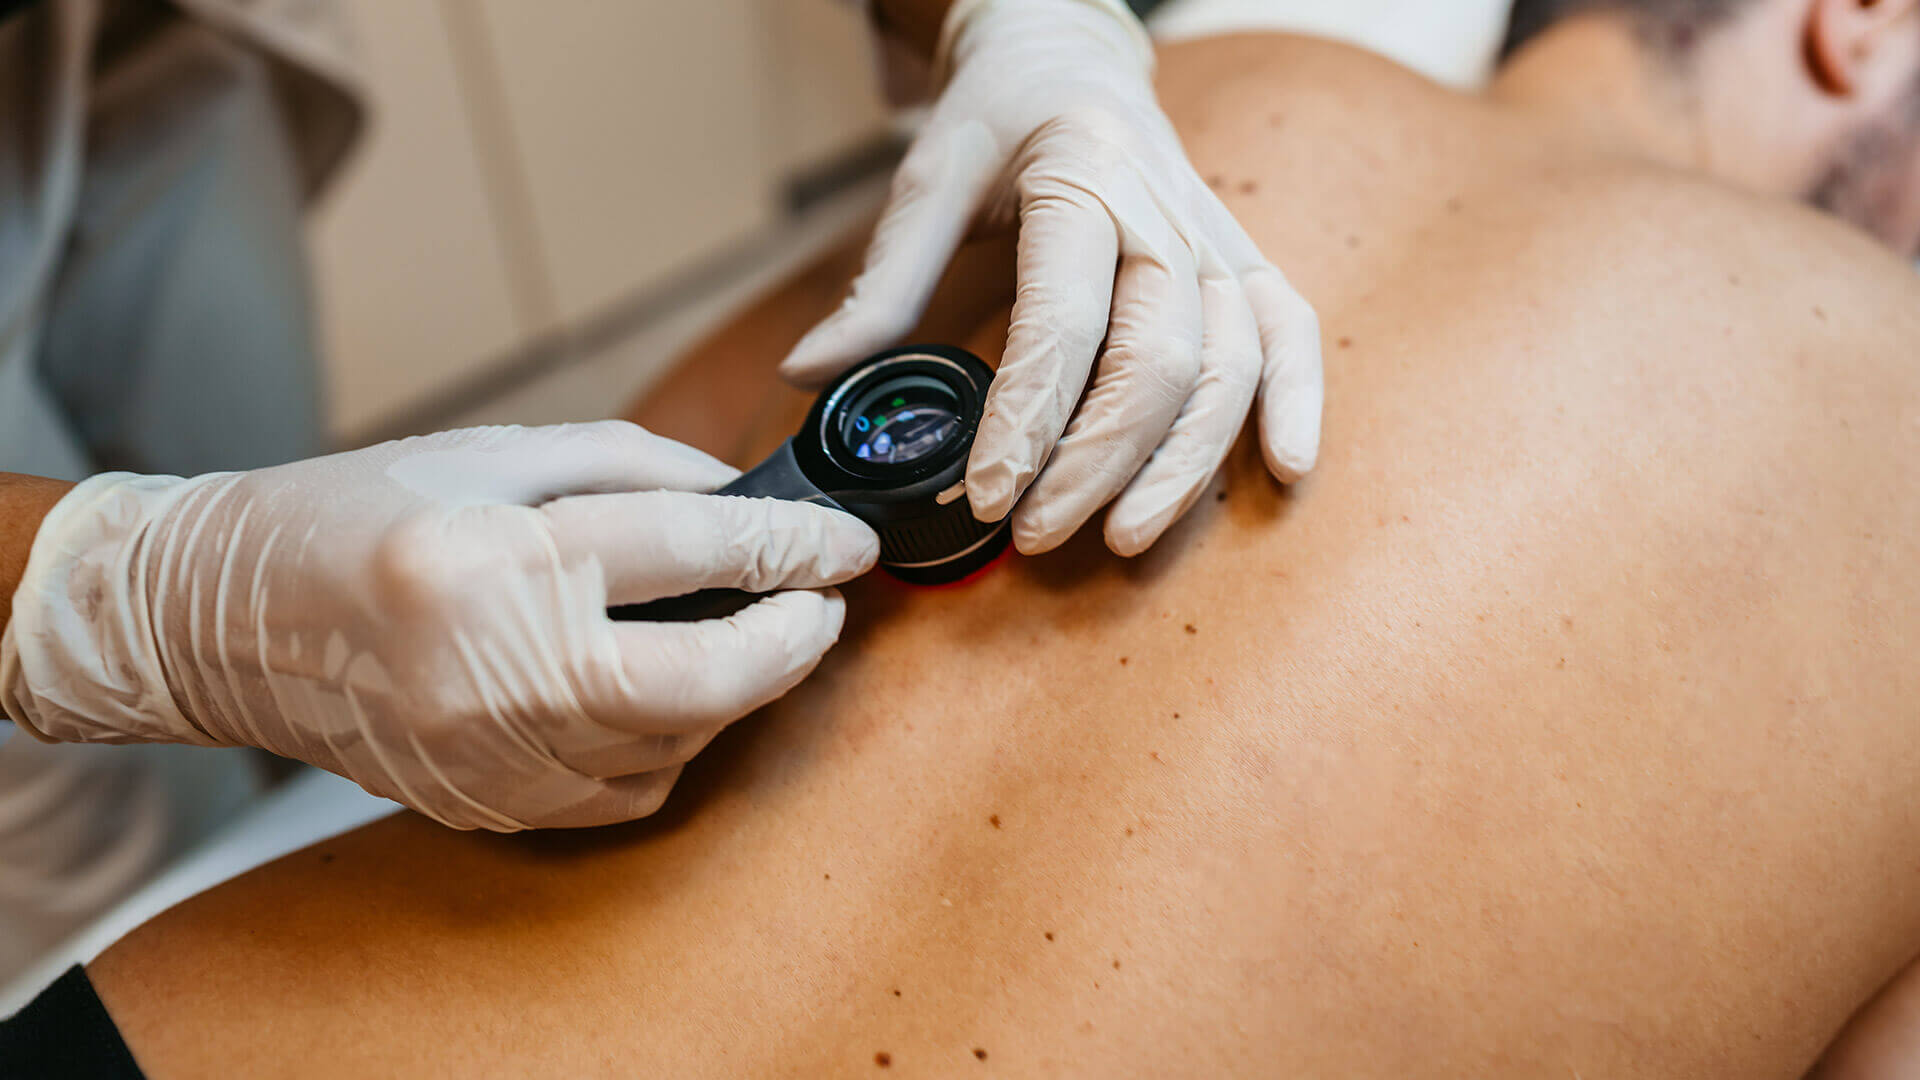 Melanoma: What It Is, Causes, Symptoms, and Treatment